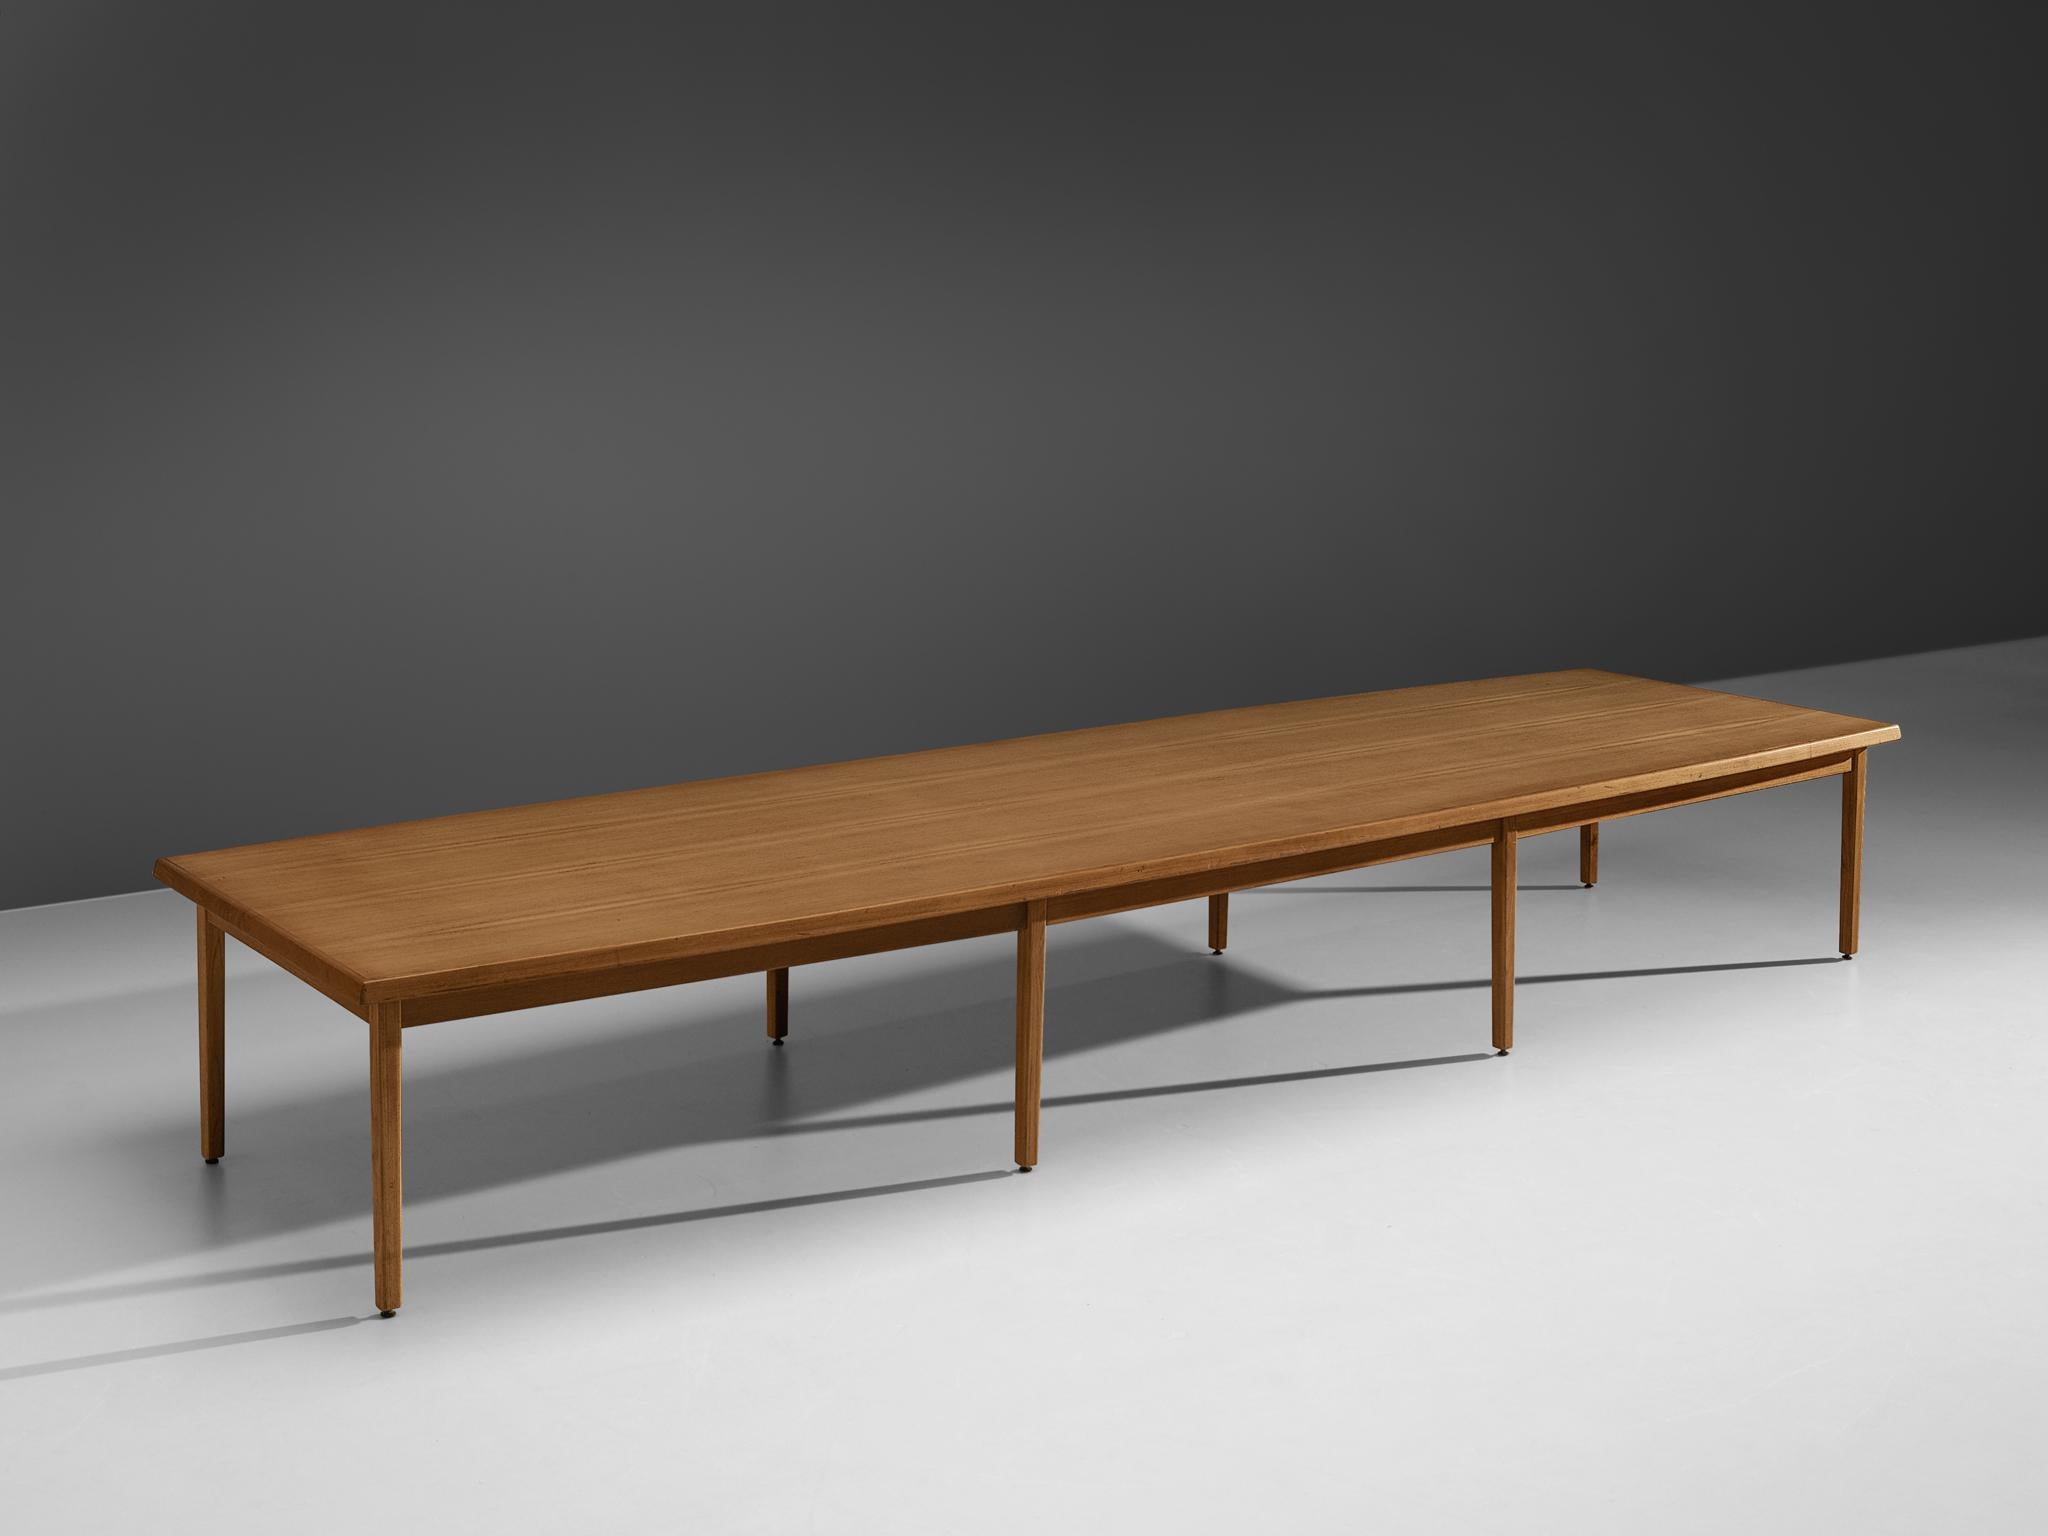 Scandinavian Modern Large Danish Conference or Dining Table in Teak 16 feet  For Sale